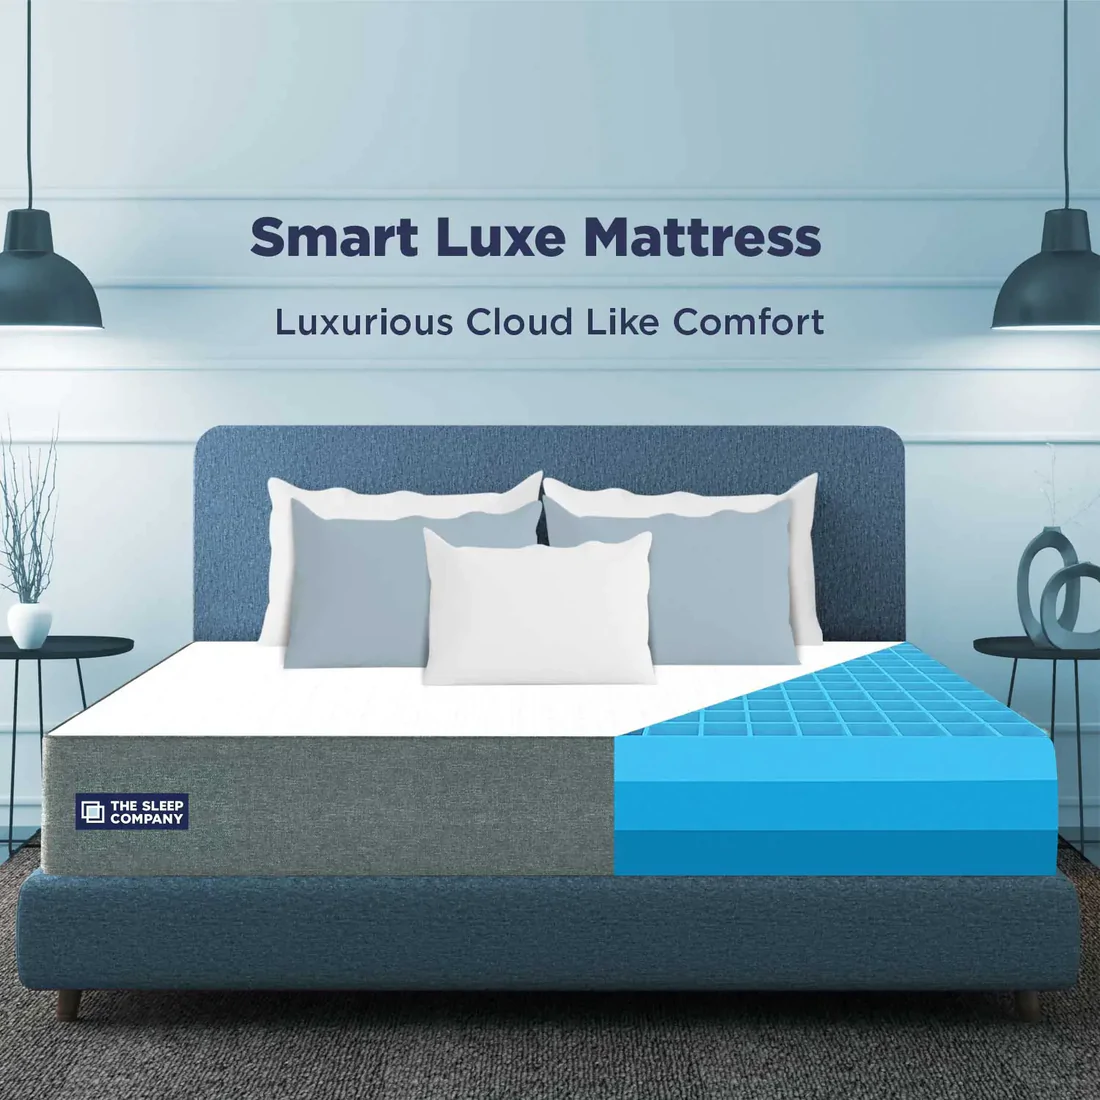 What Are The Benefits Of Buying A Soft Mattress?